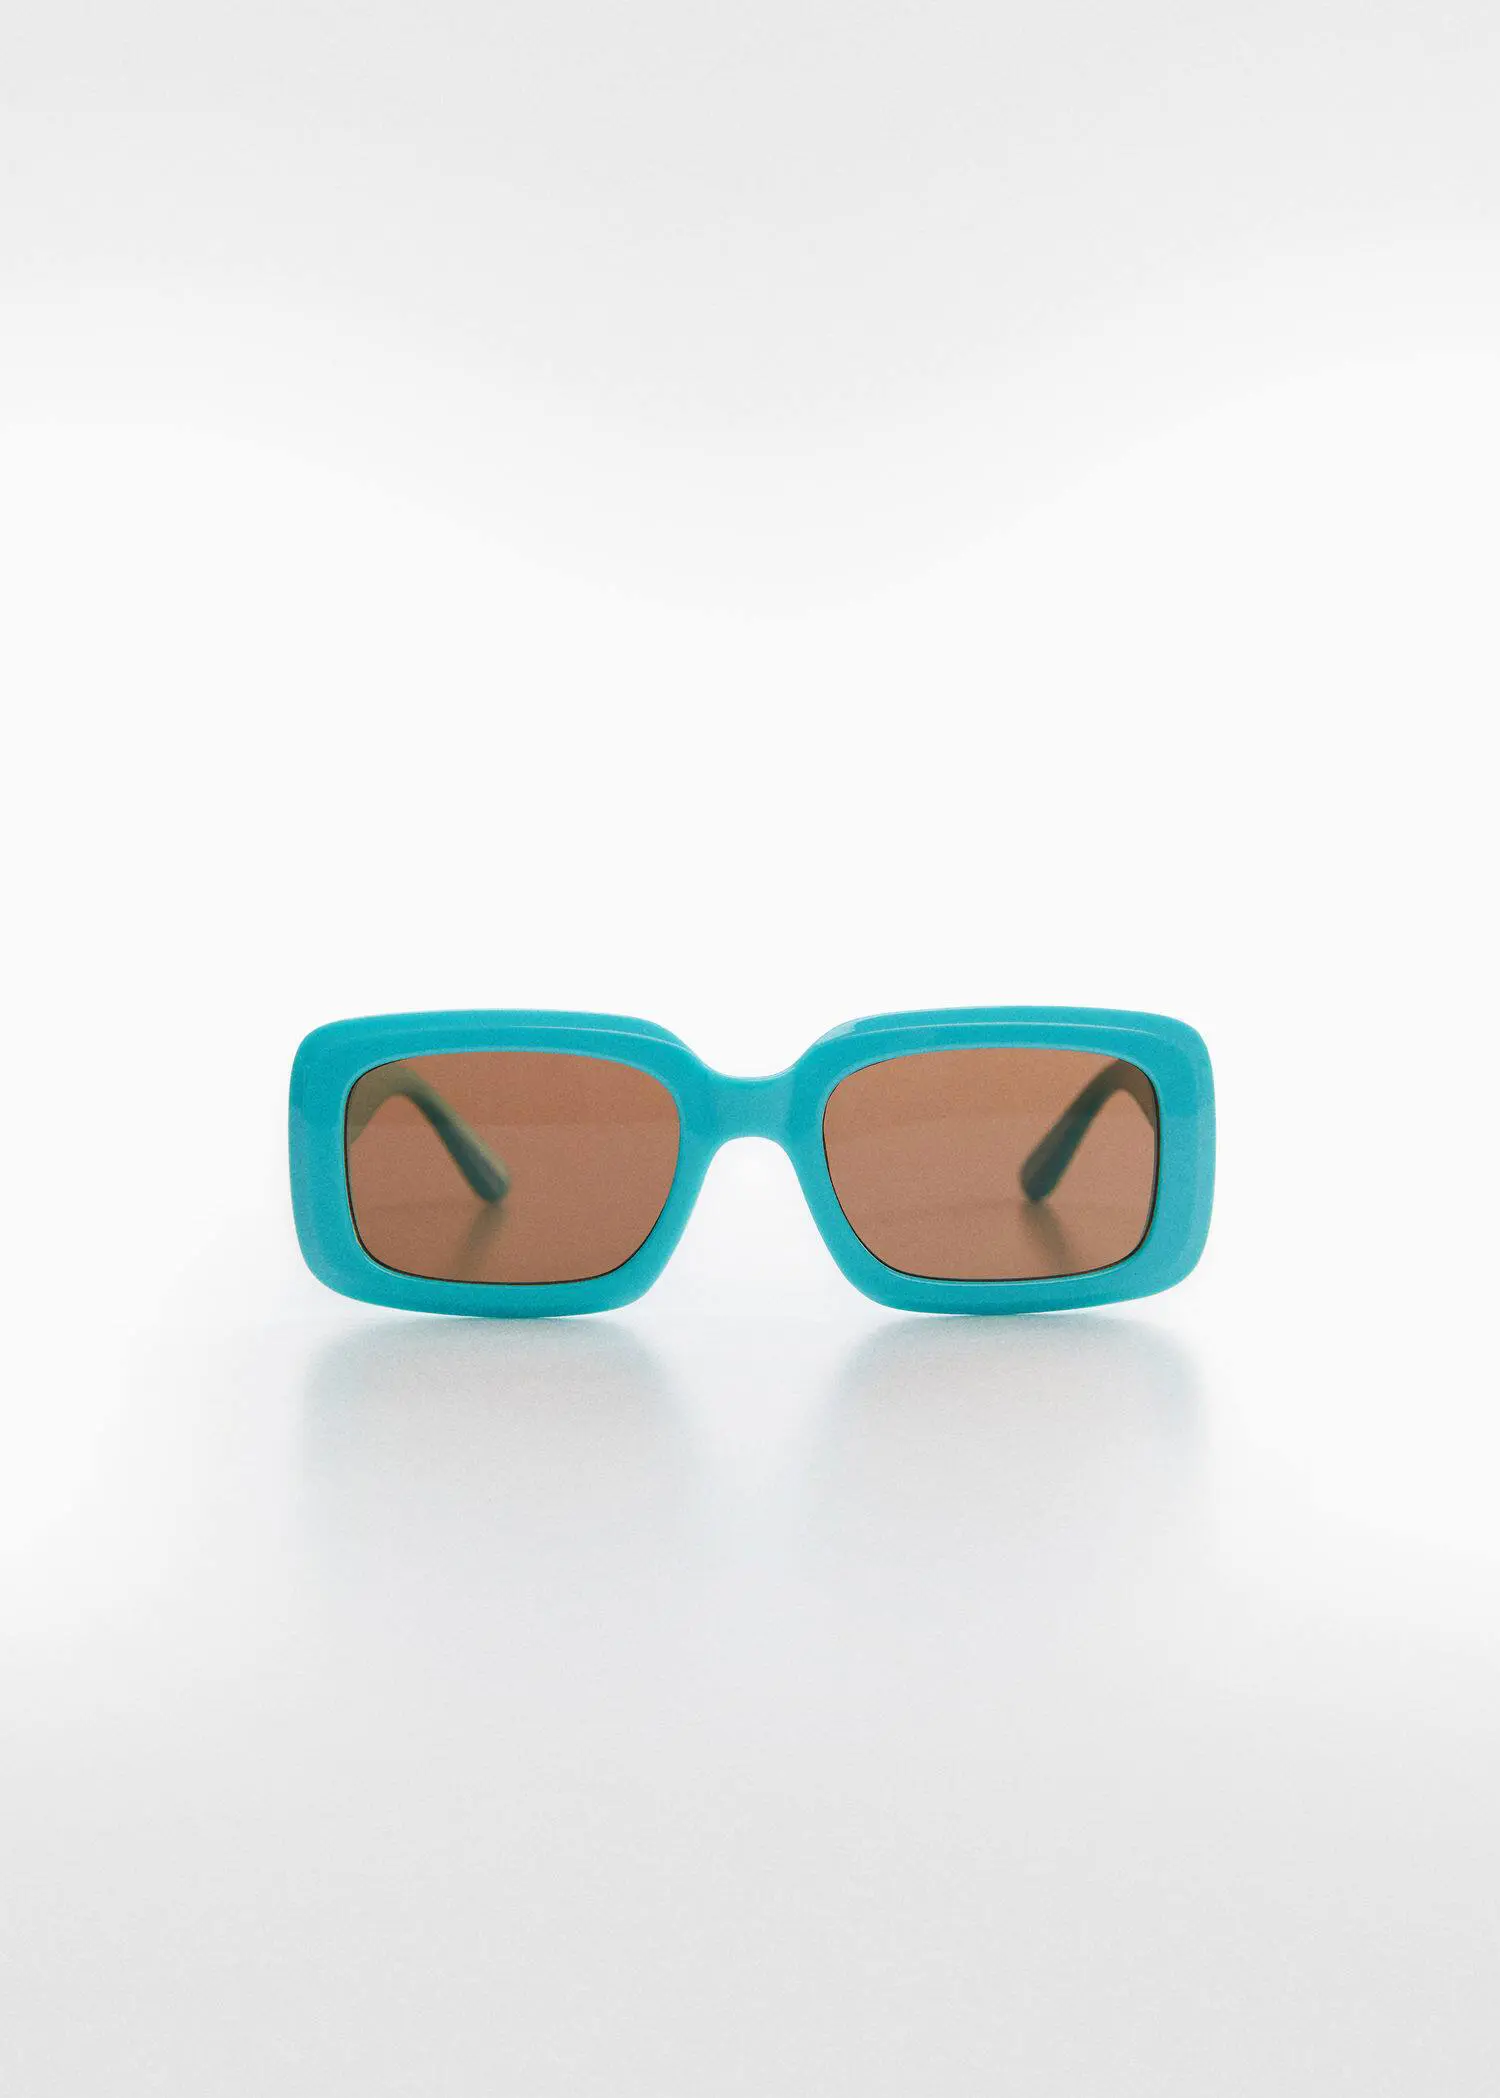 Mango Rectangular sunglasses. a pair of sunglasses sitting on top of a white table. 